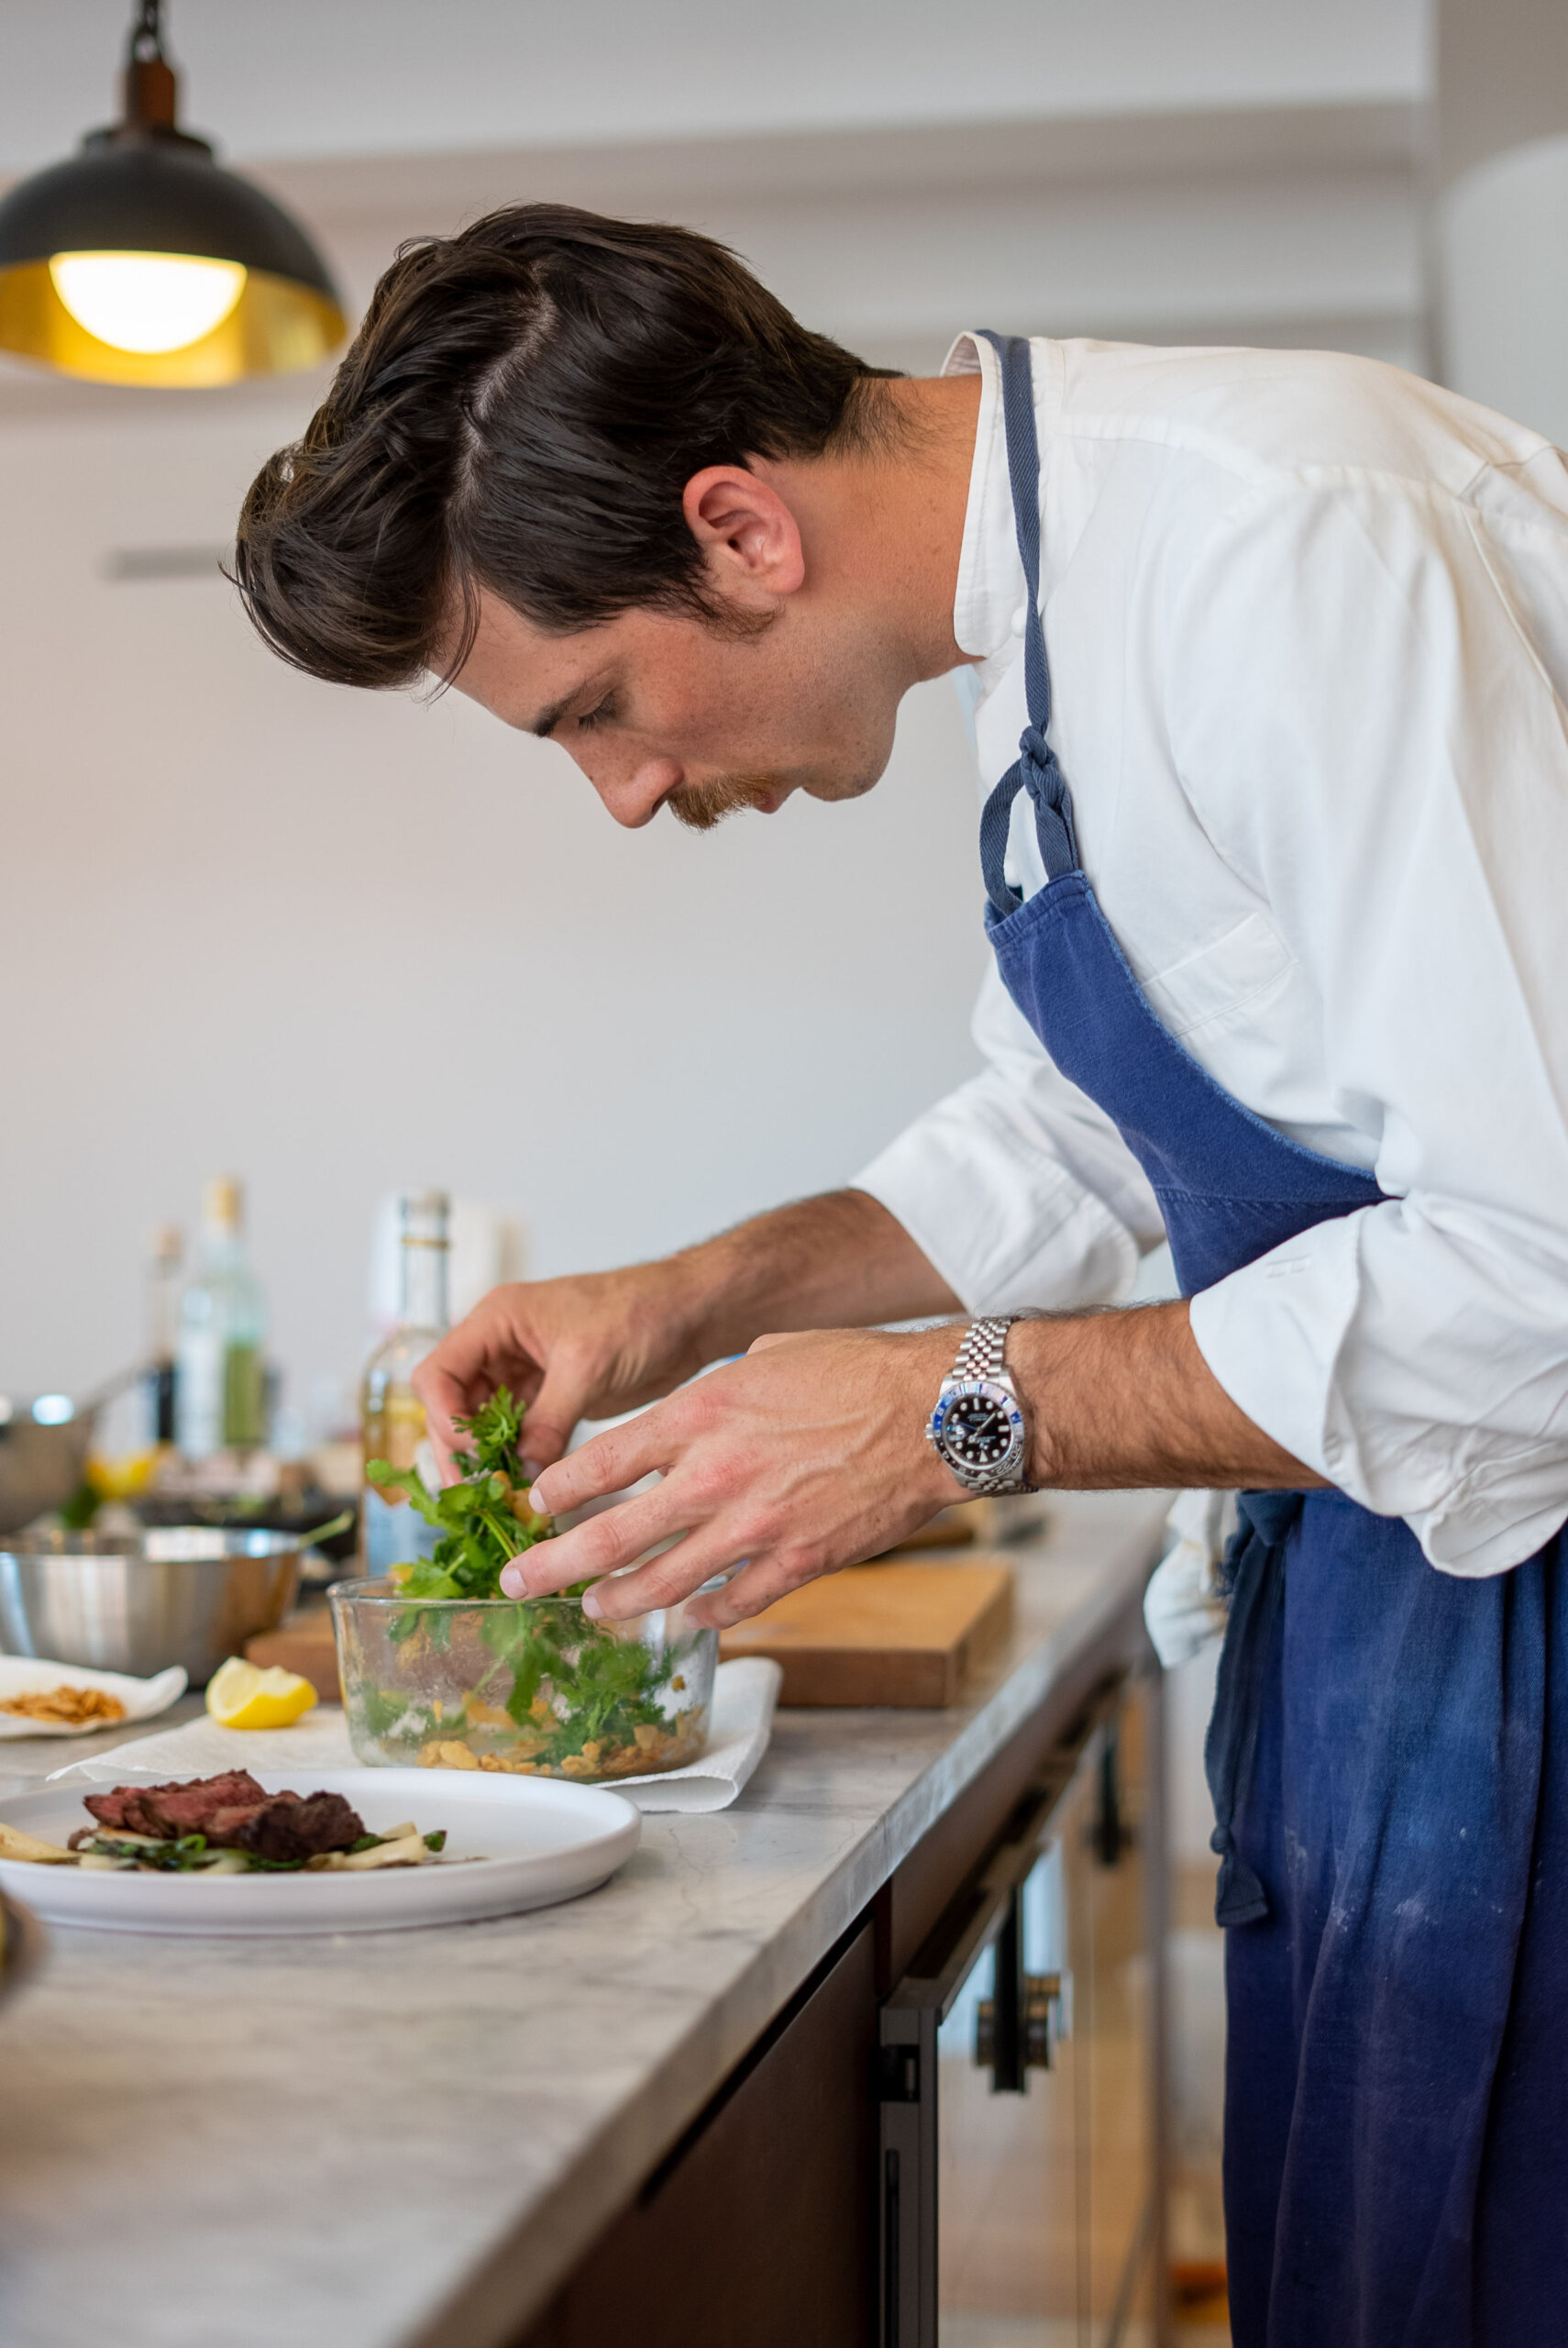 Brian Arruda, the founder and CEO of Executive Chefs at Home